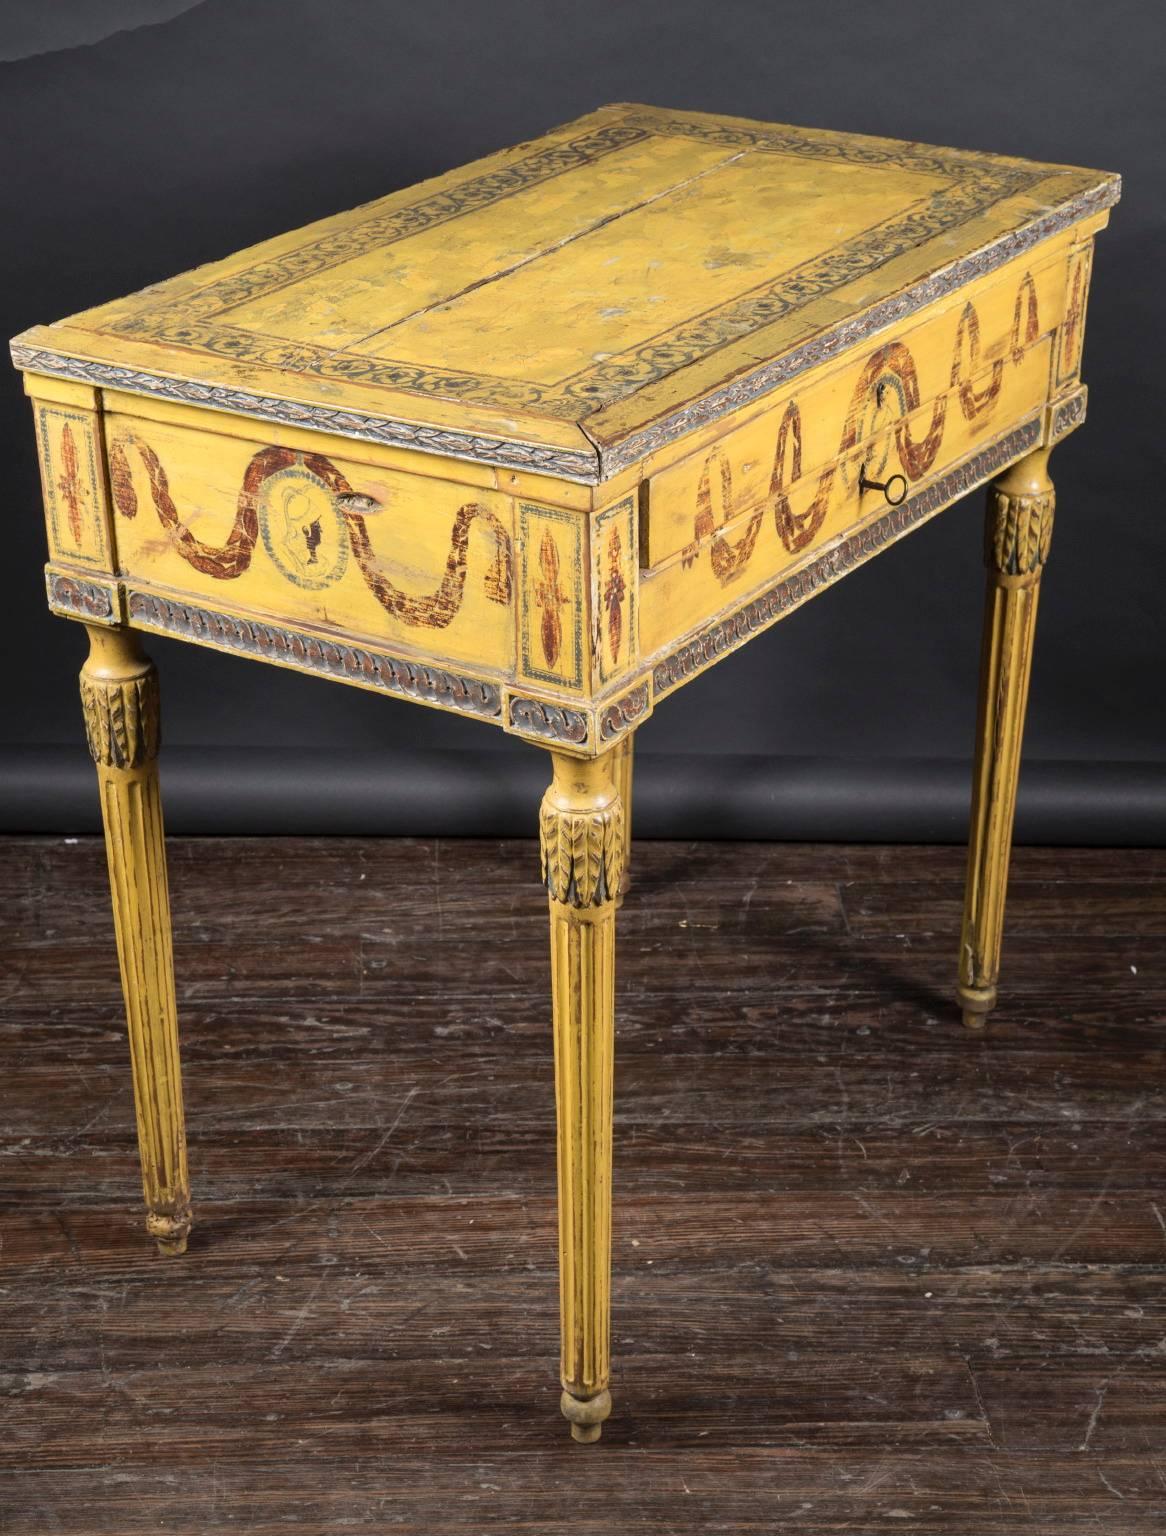 This classic and simple Louis XVI hand painted table features two center drawers dates back to the 18th century. The French antique piece sports details around the apron, at both top and bottom, and rests on long fluted legs classic to the Louis XVI